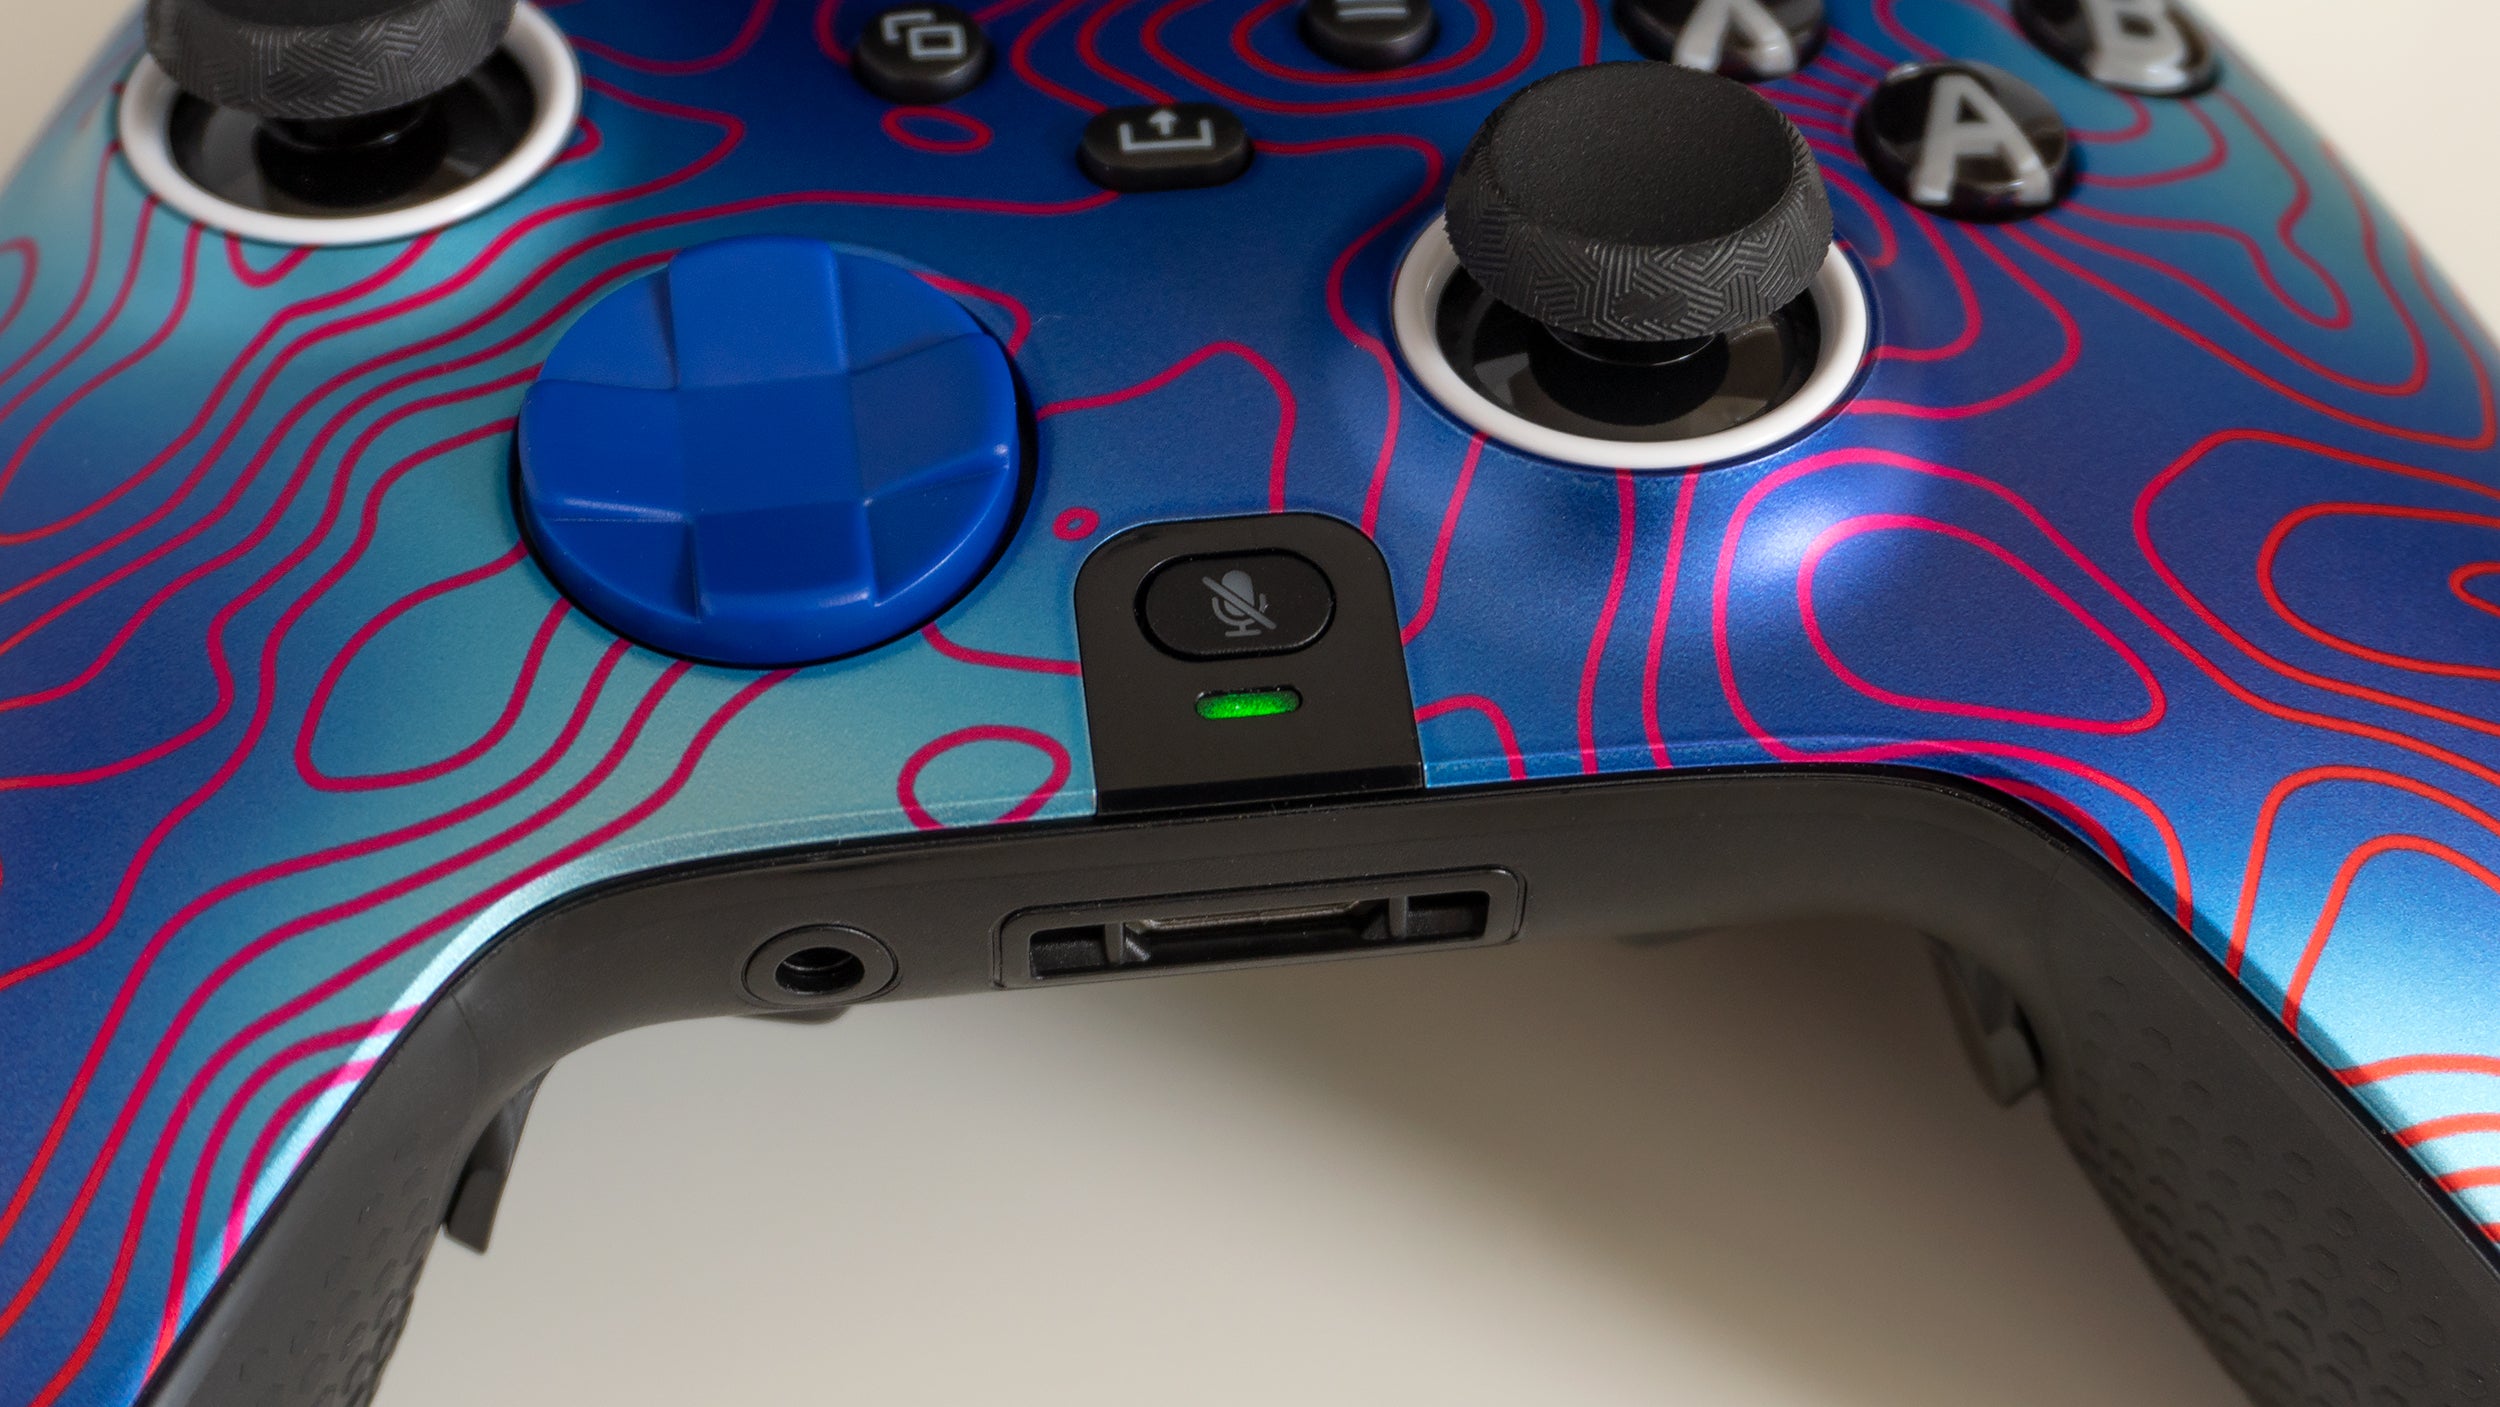 Up to three custom remap profiles can be stored on the Scuf Instinct and Instinct Pro, and toggled using a Profile button on the back. (Photo: Andrew Liszewski - Gizmodo)